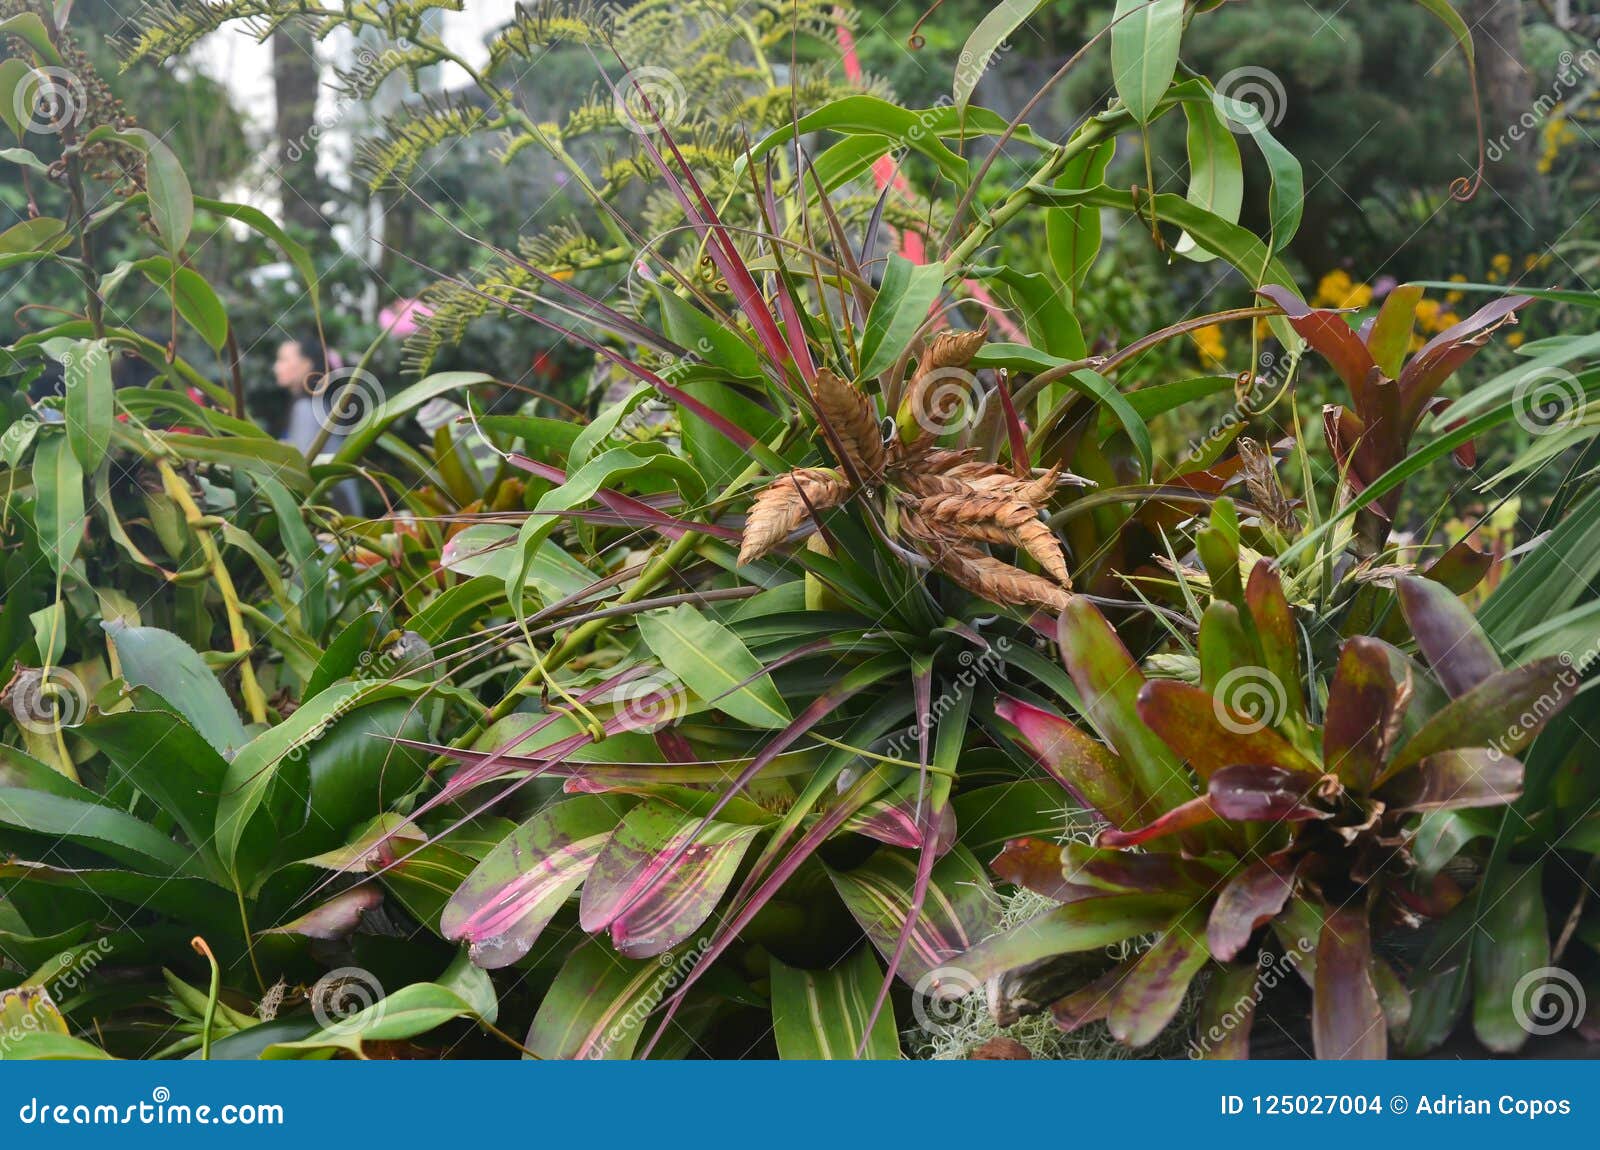 tropical plants in a cloud forest enviroment